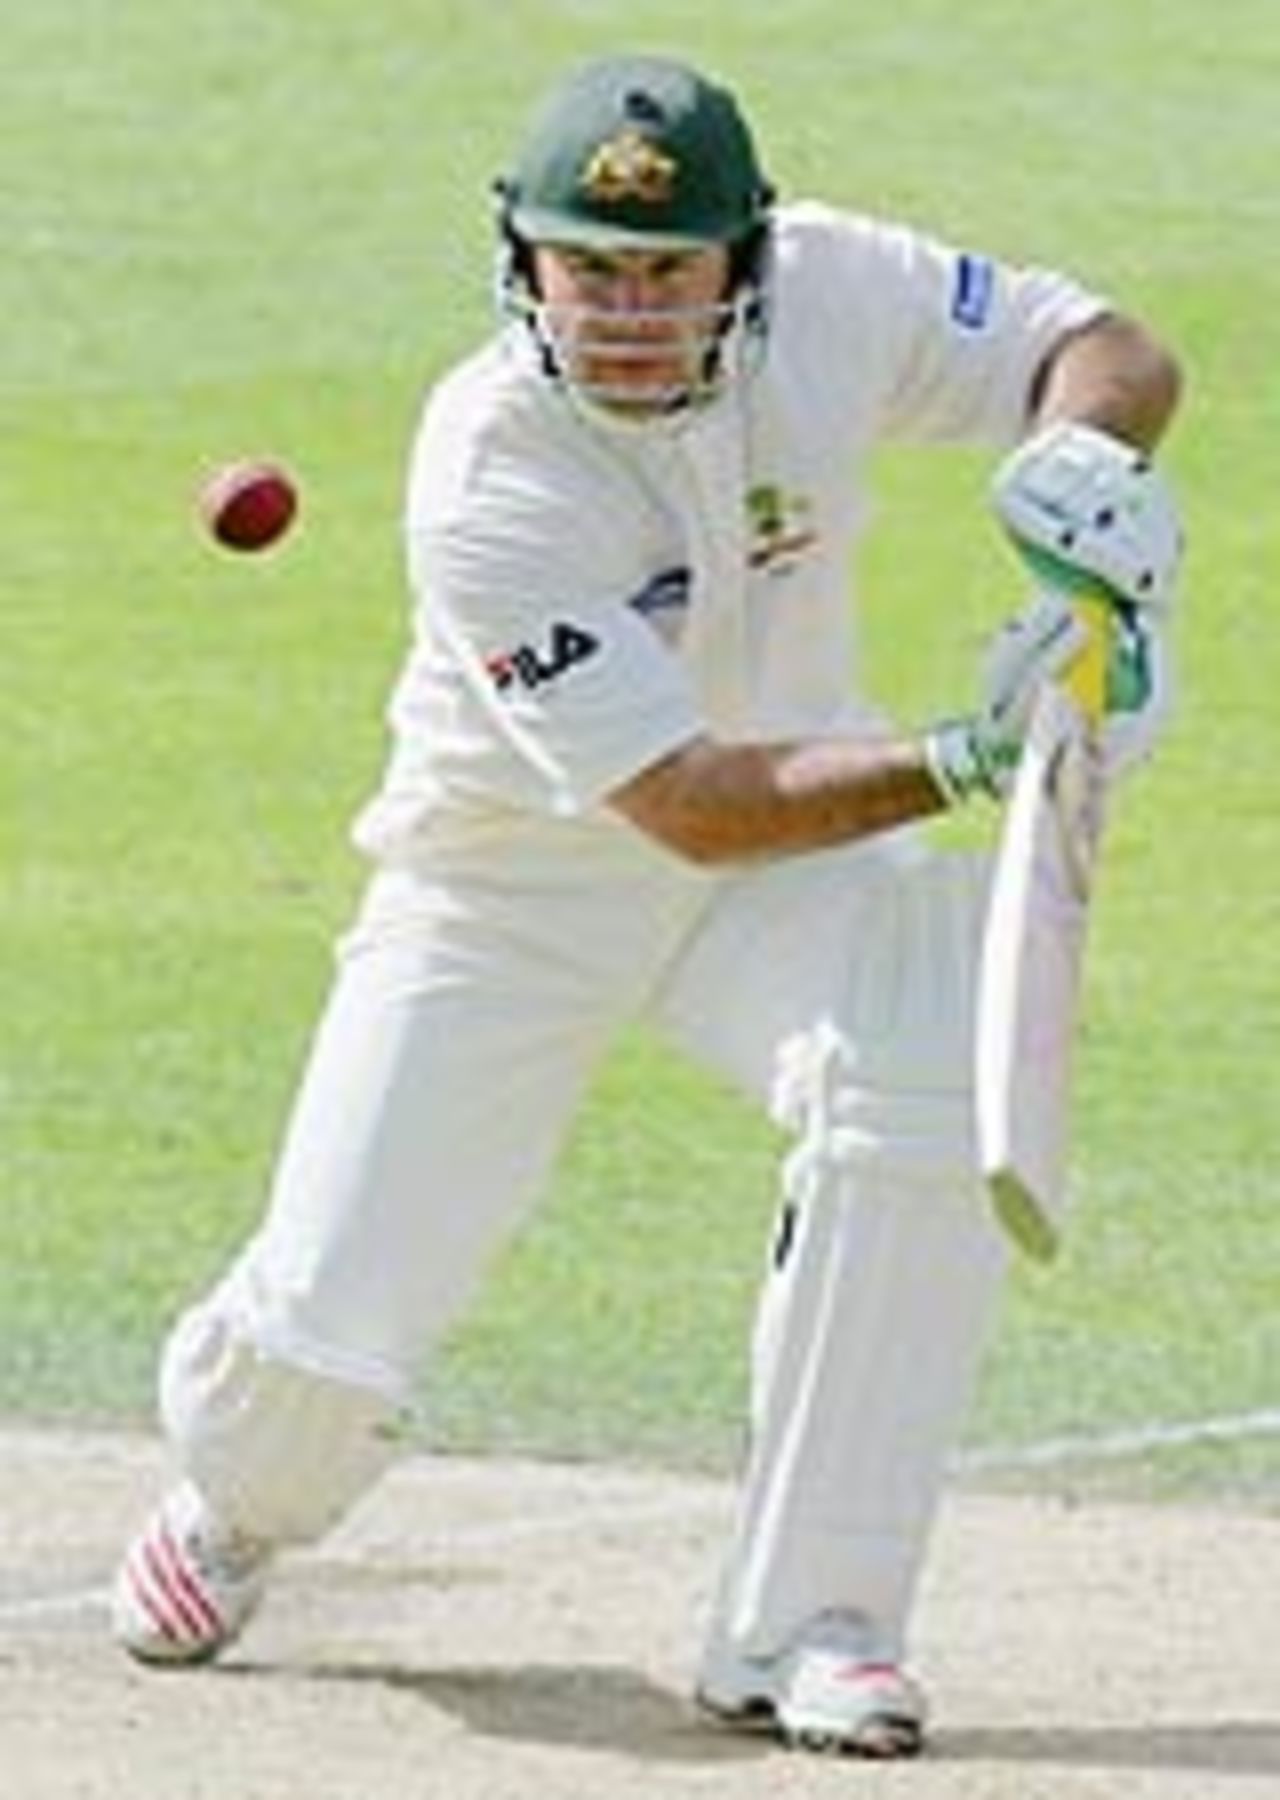 Ricky Ponting cover drives on the way to a 104-ball century, New Zealand v Australia, 3rd Test, Auckland, 2nd day